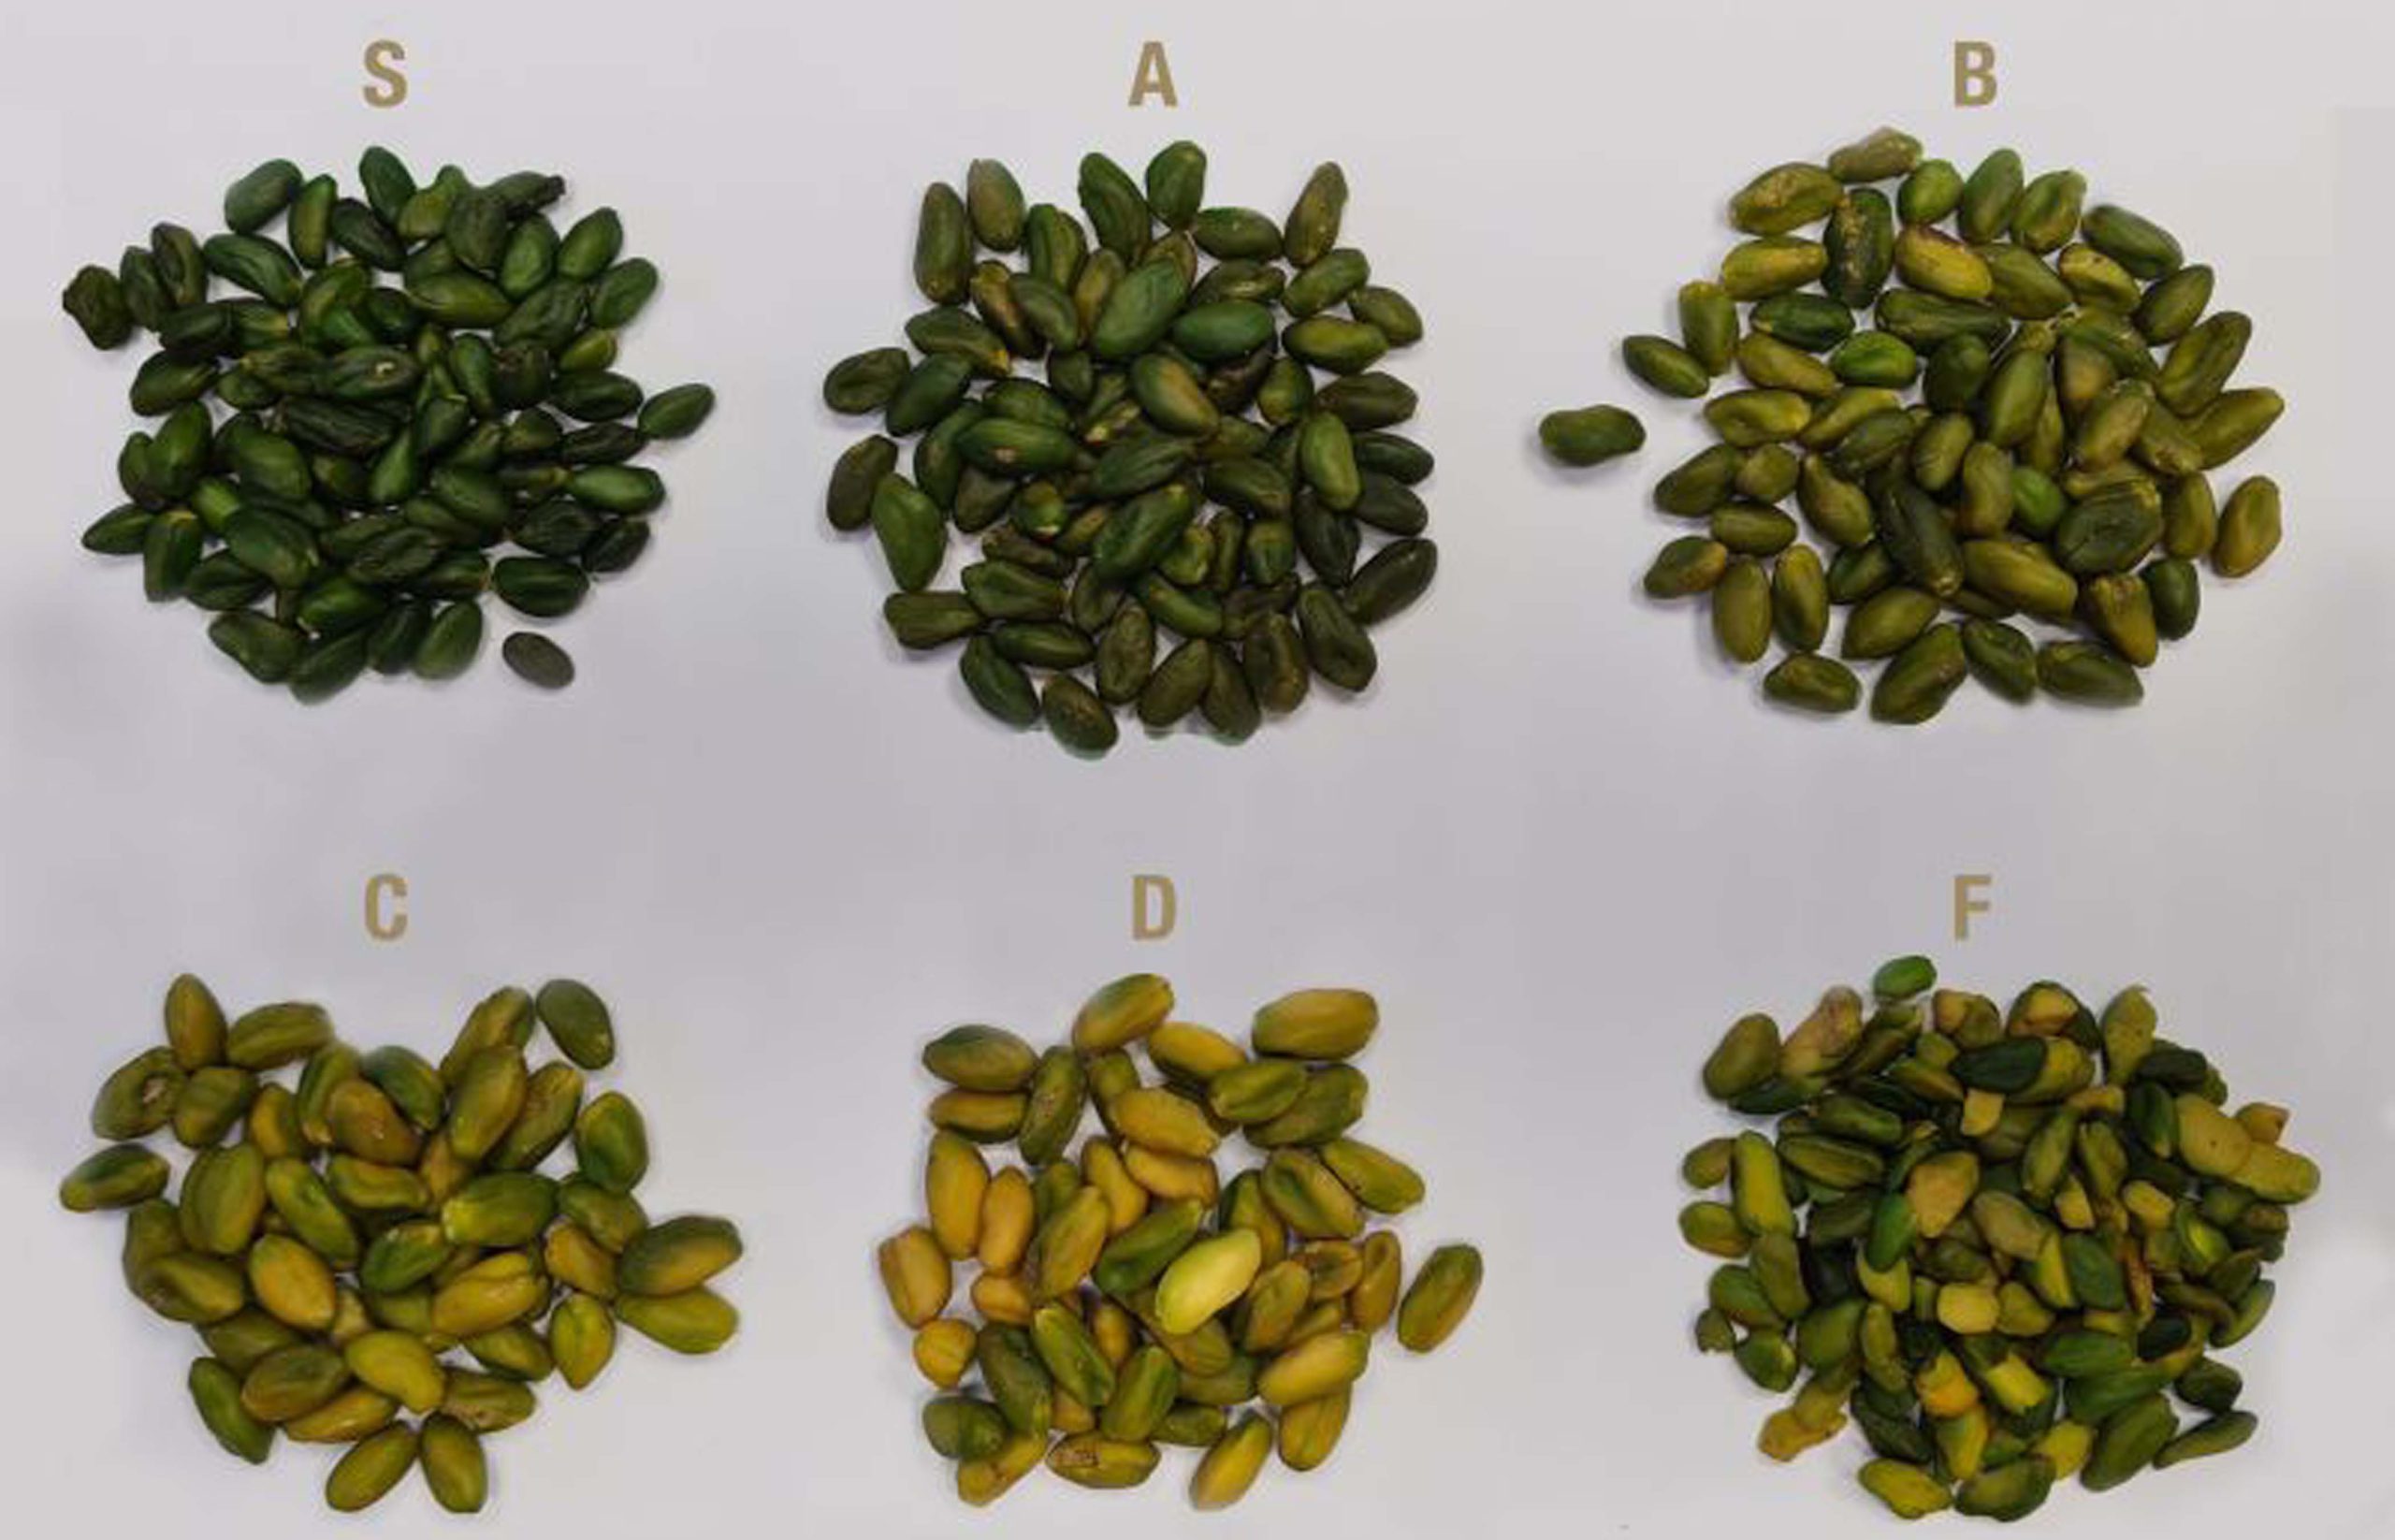 Green pistachio kernel grading and its daily price